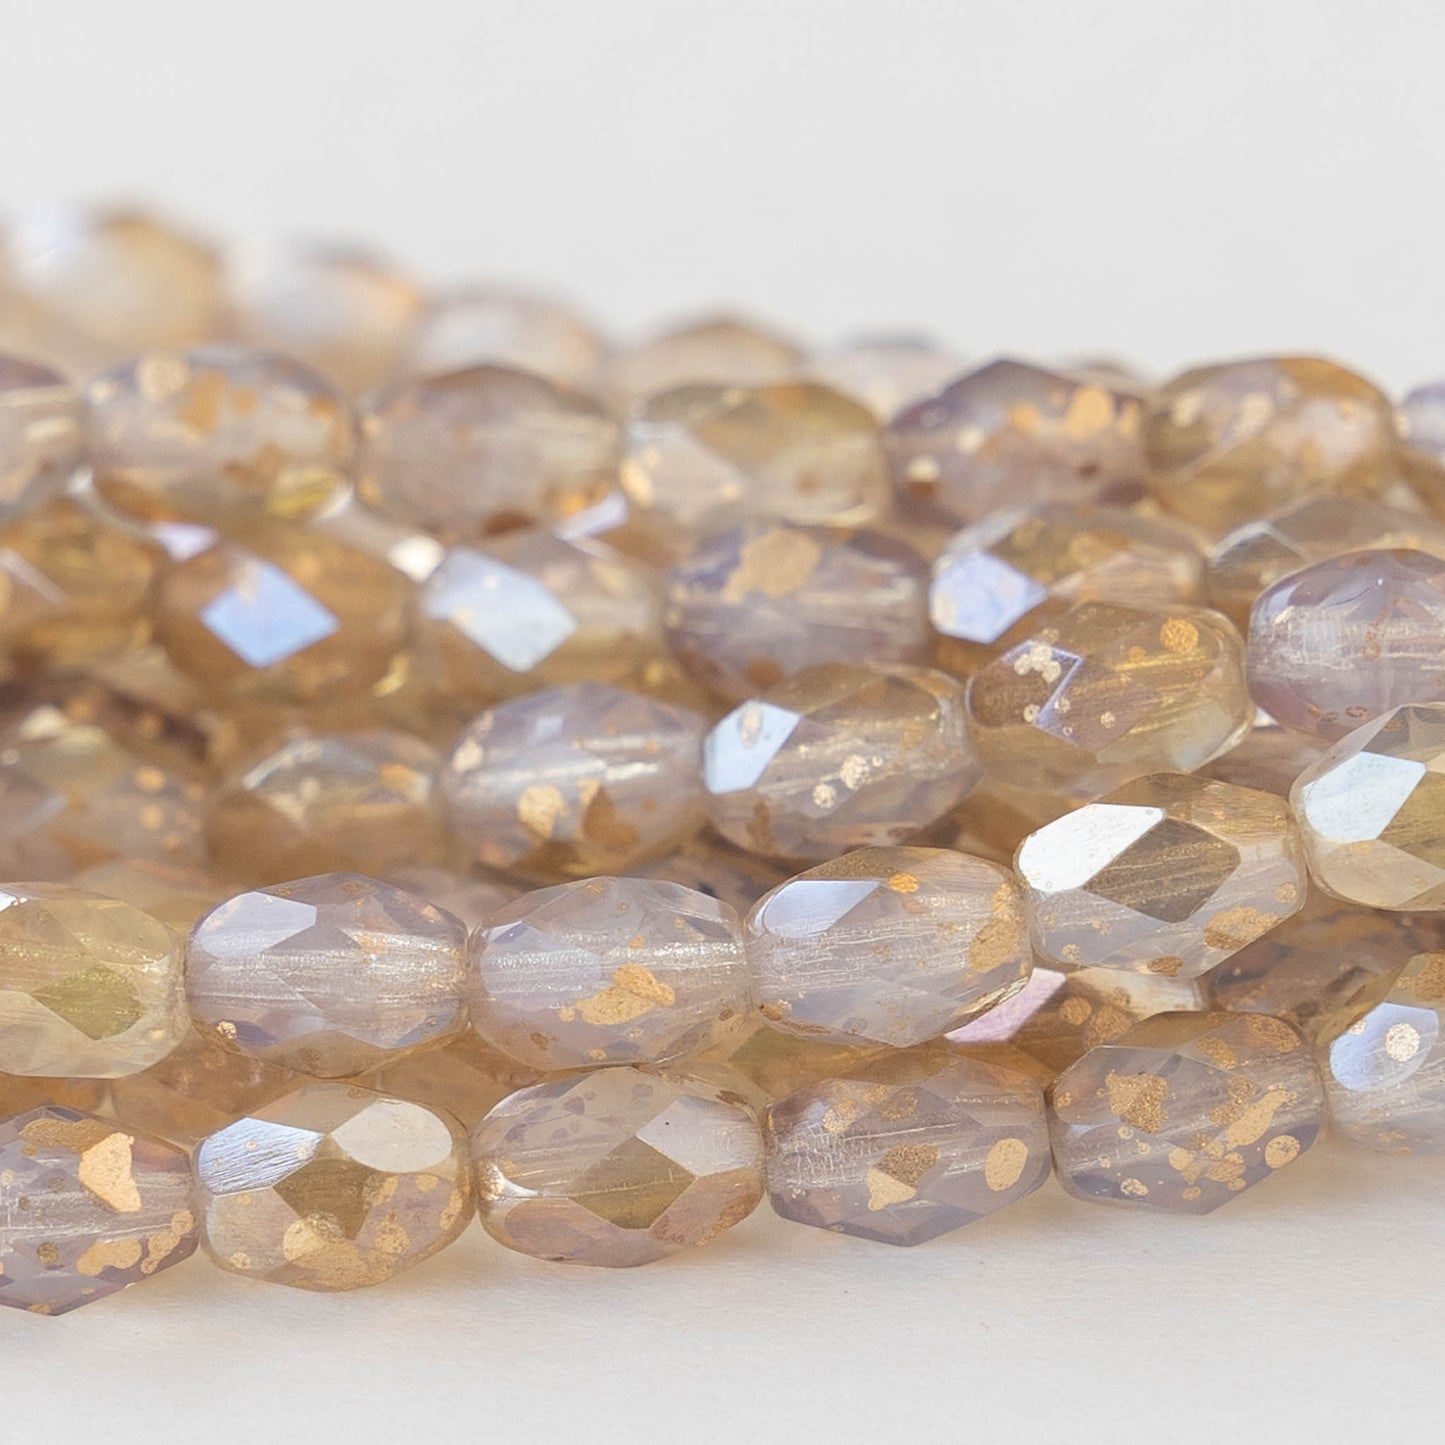 5x7mm Oval Beads - Opal with Bronze and Gold Finishes - 20 beads